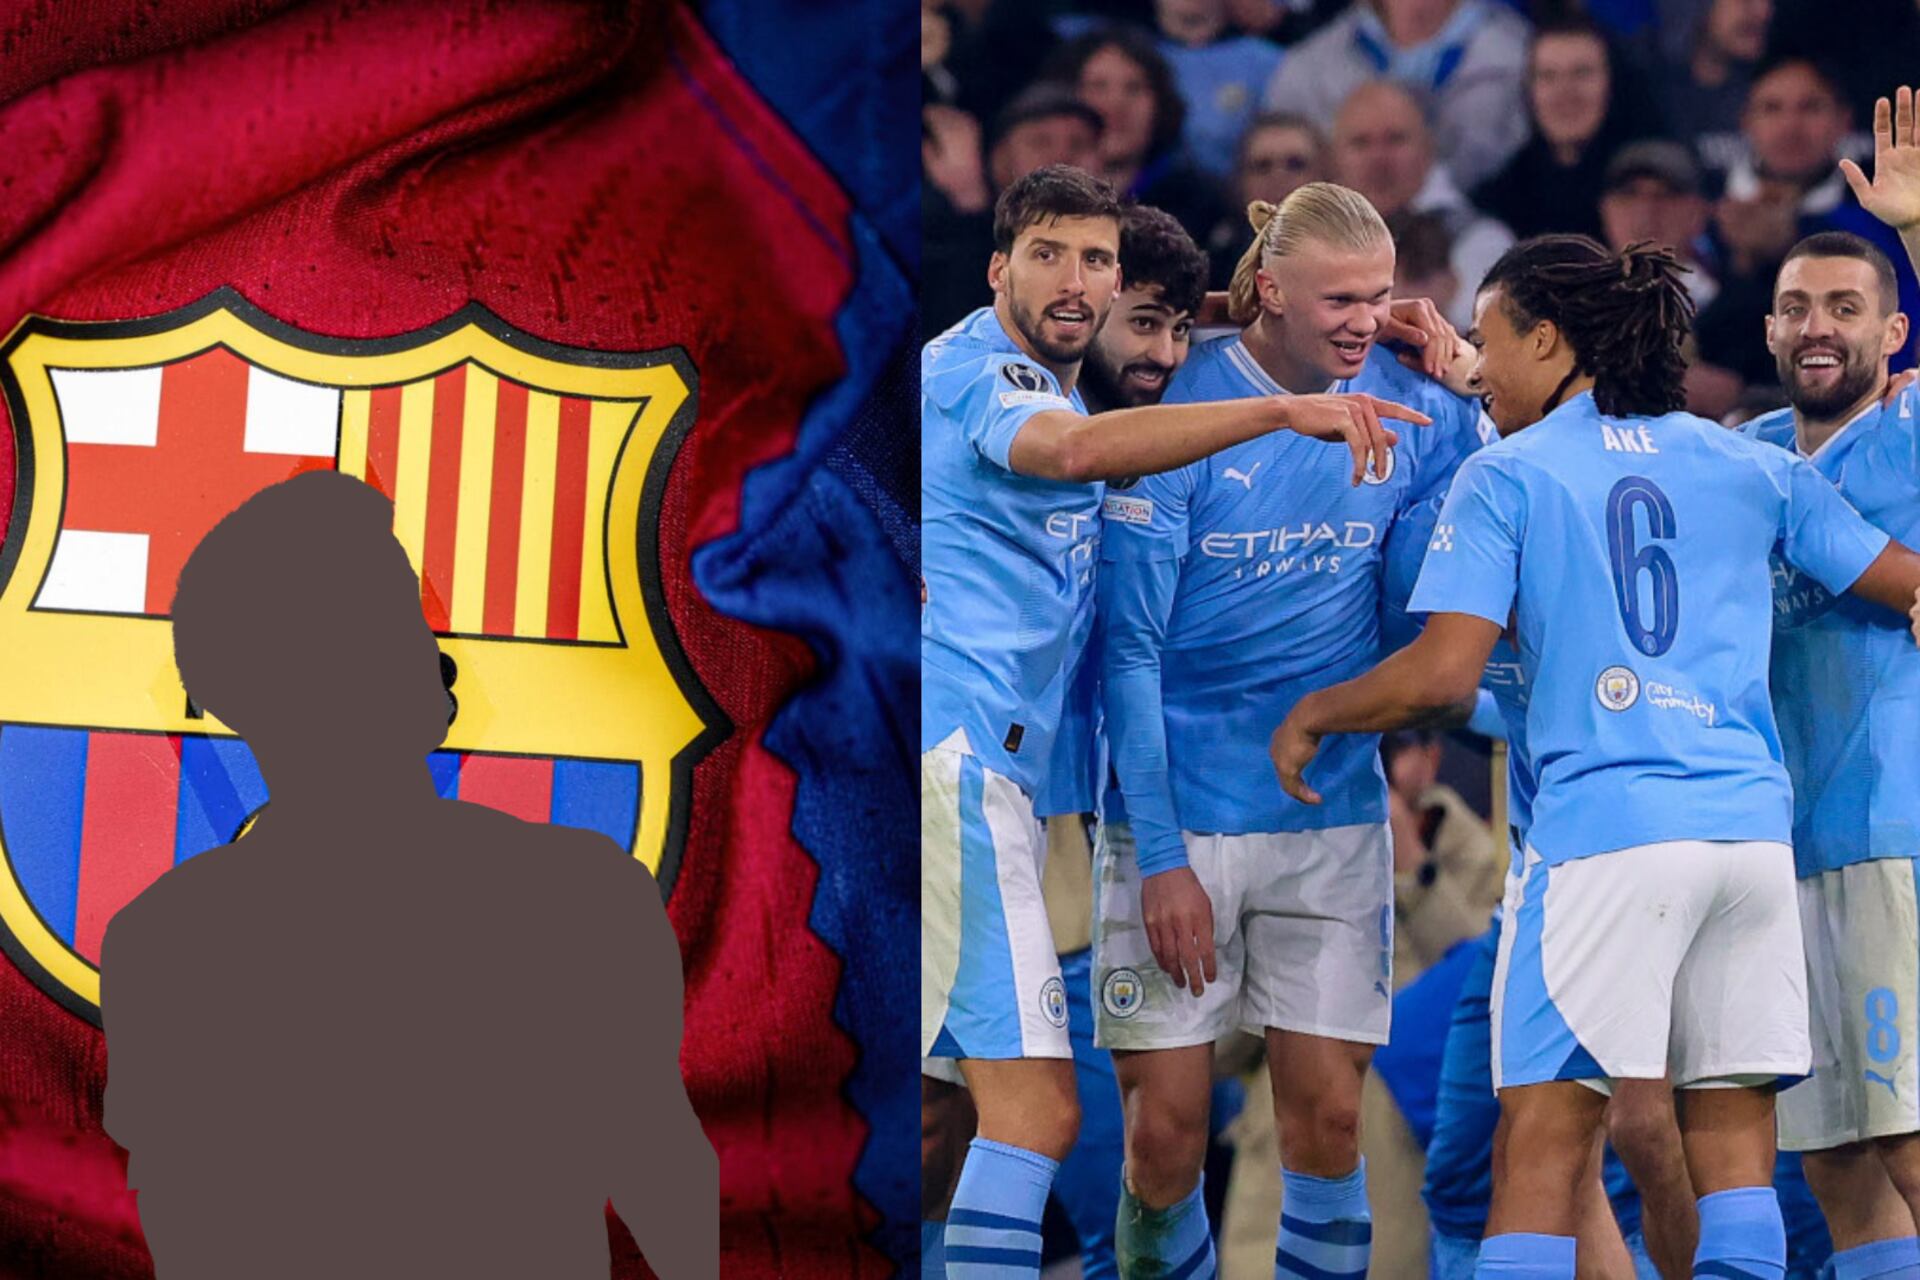 Despite playing for FC Barcelona, he picks Man City to win the Champions League